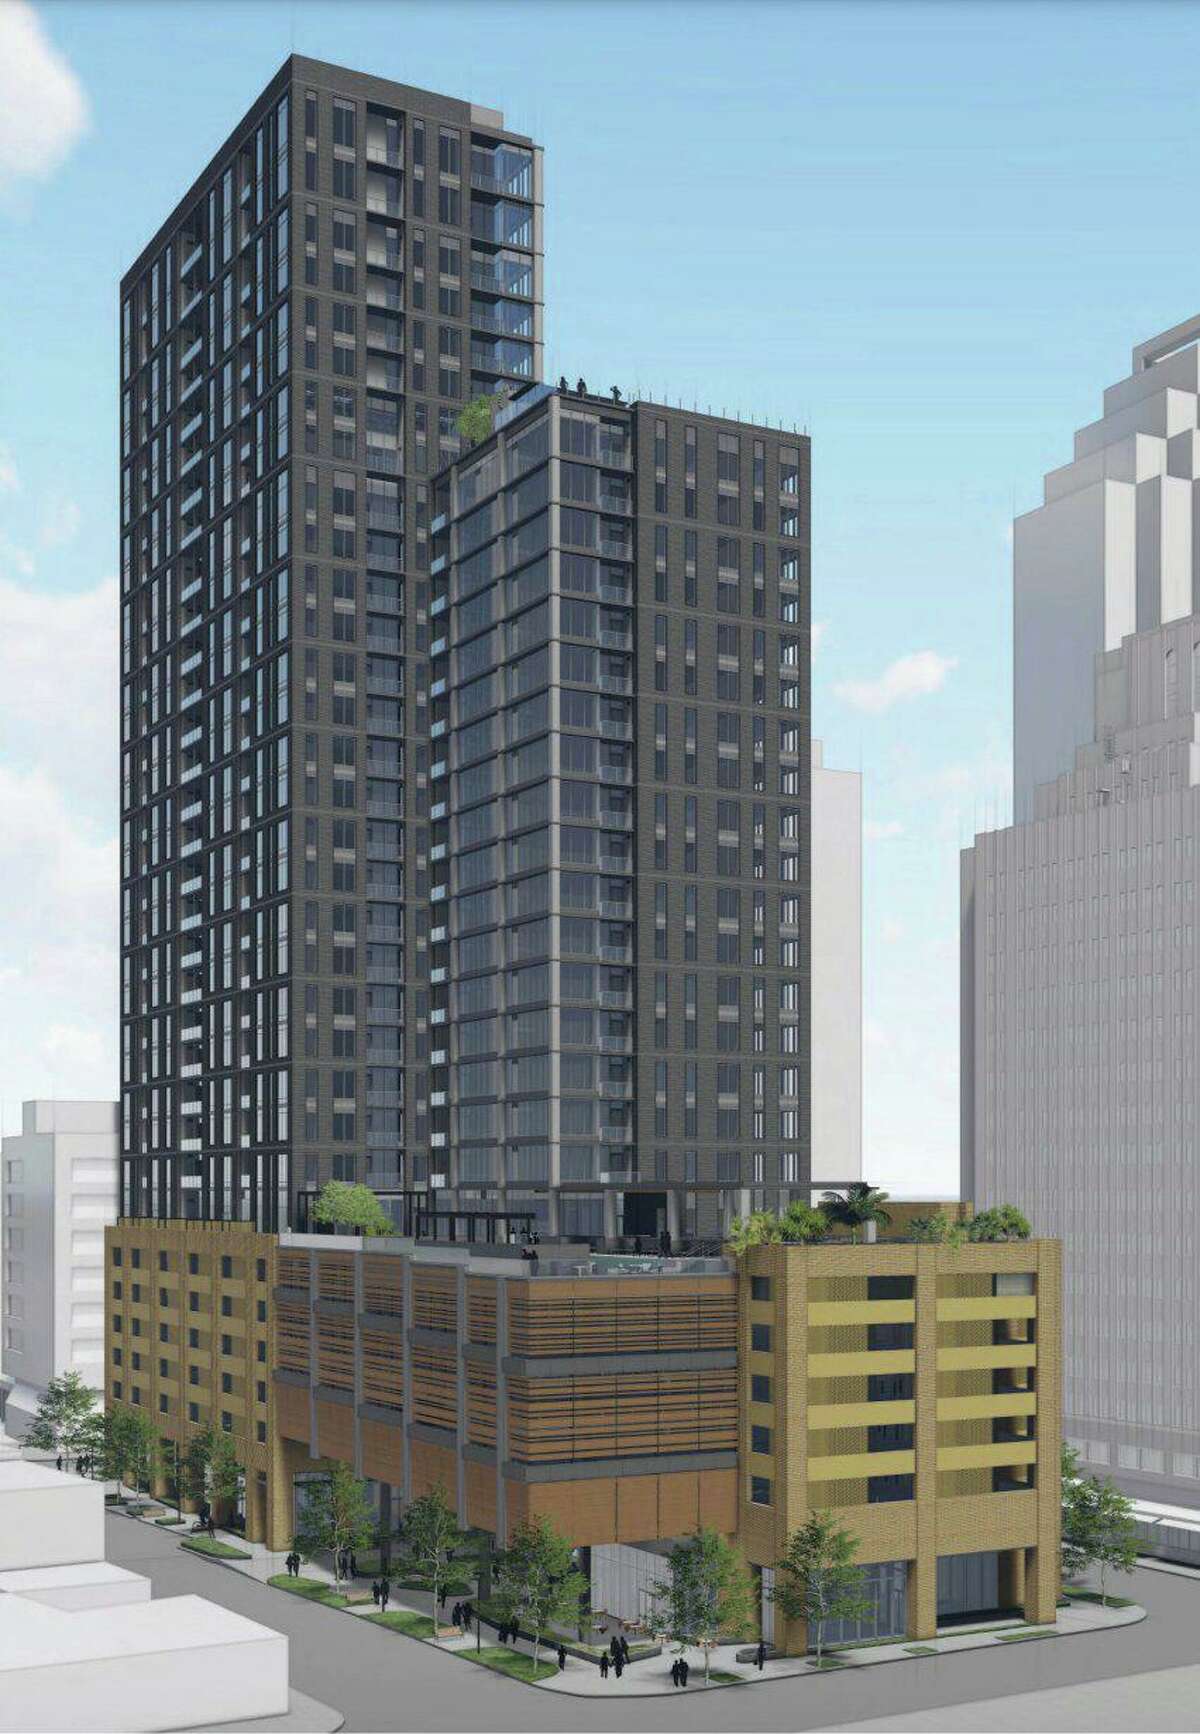 A rendering shows the residential tower Weston Urban plans to build at 305 Soledad St. in downtown San Antonio.